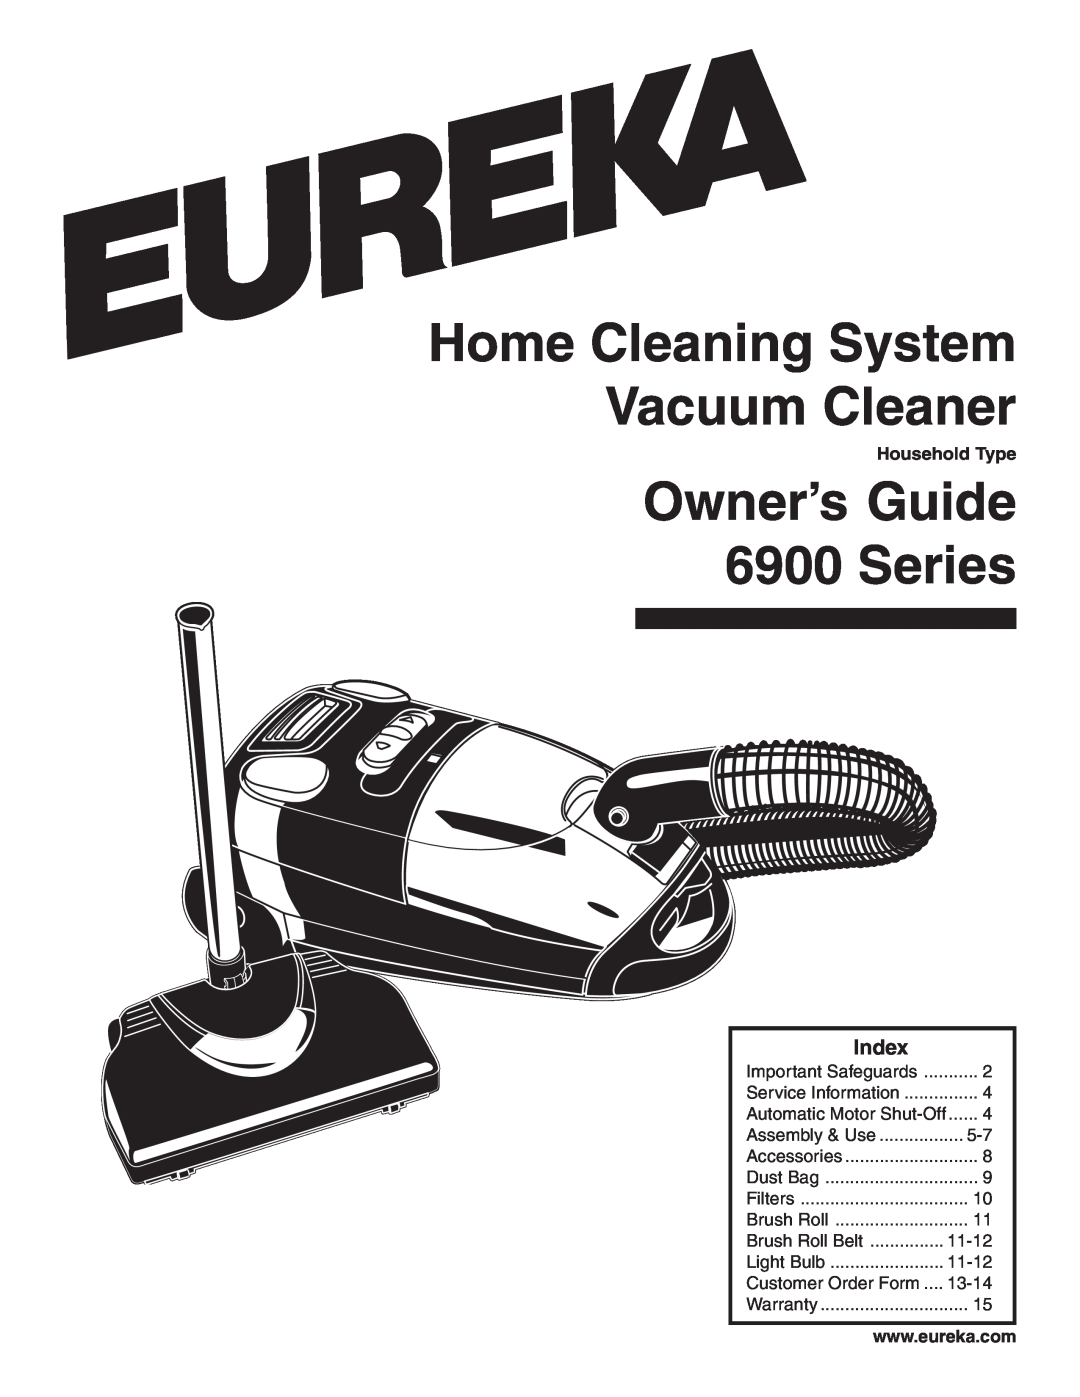 Eureka warranty Index, Household Type, Home Cleaning System Vacuum Cleaner, Owner’s Guide 6900 Series, Style, Model 